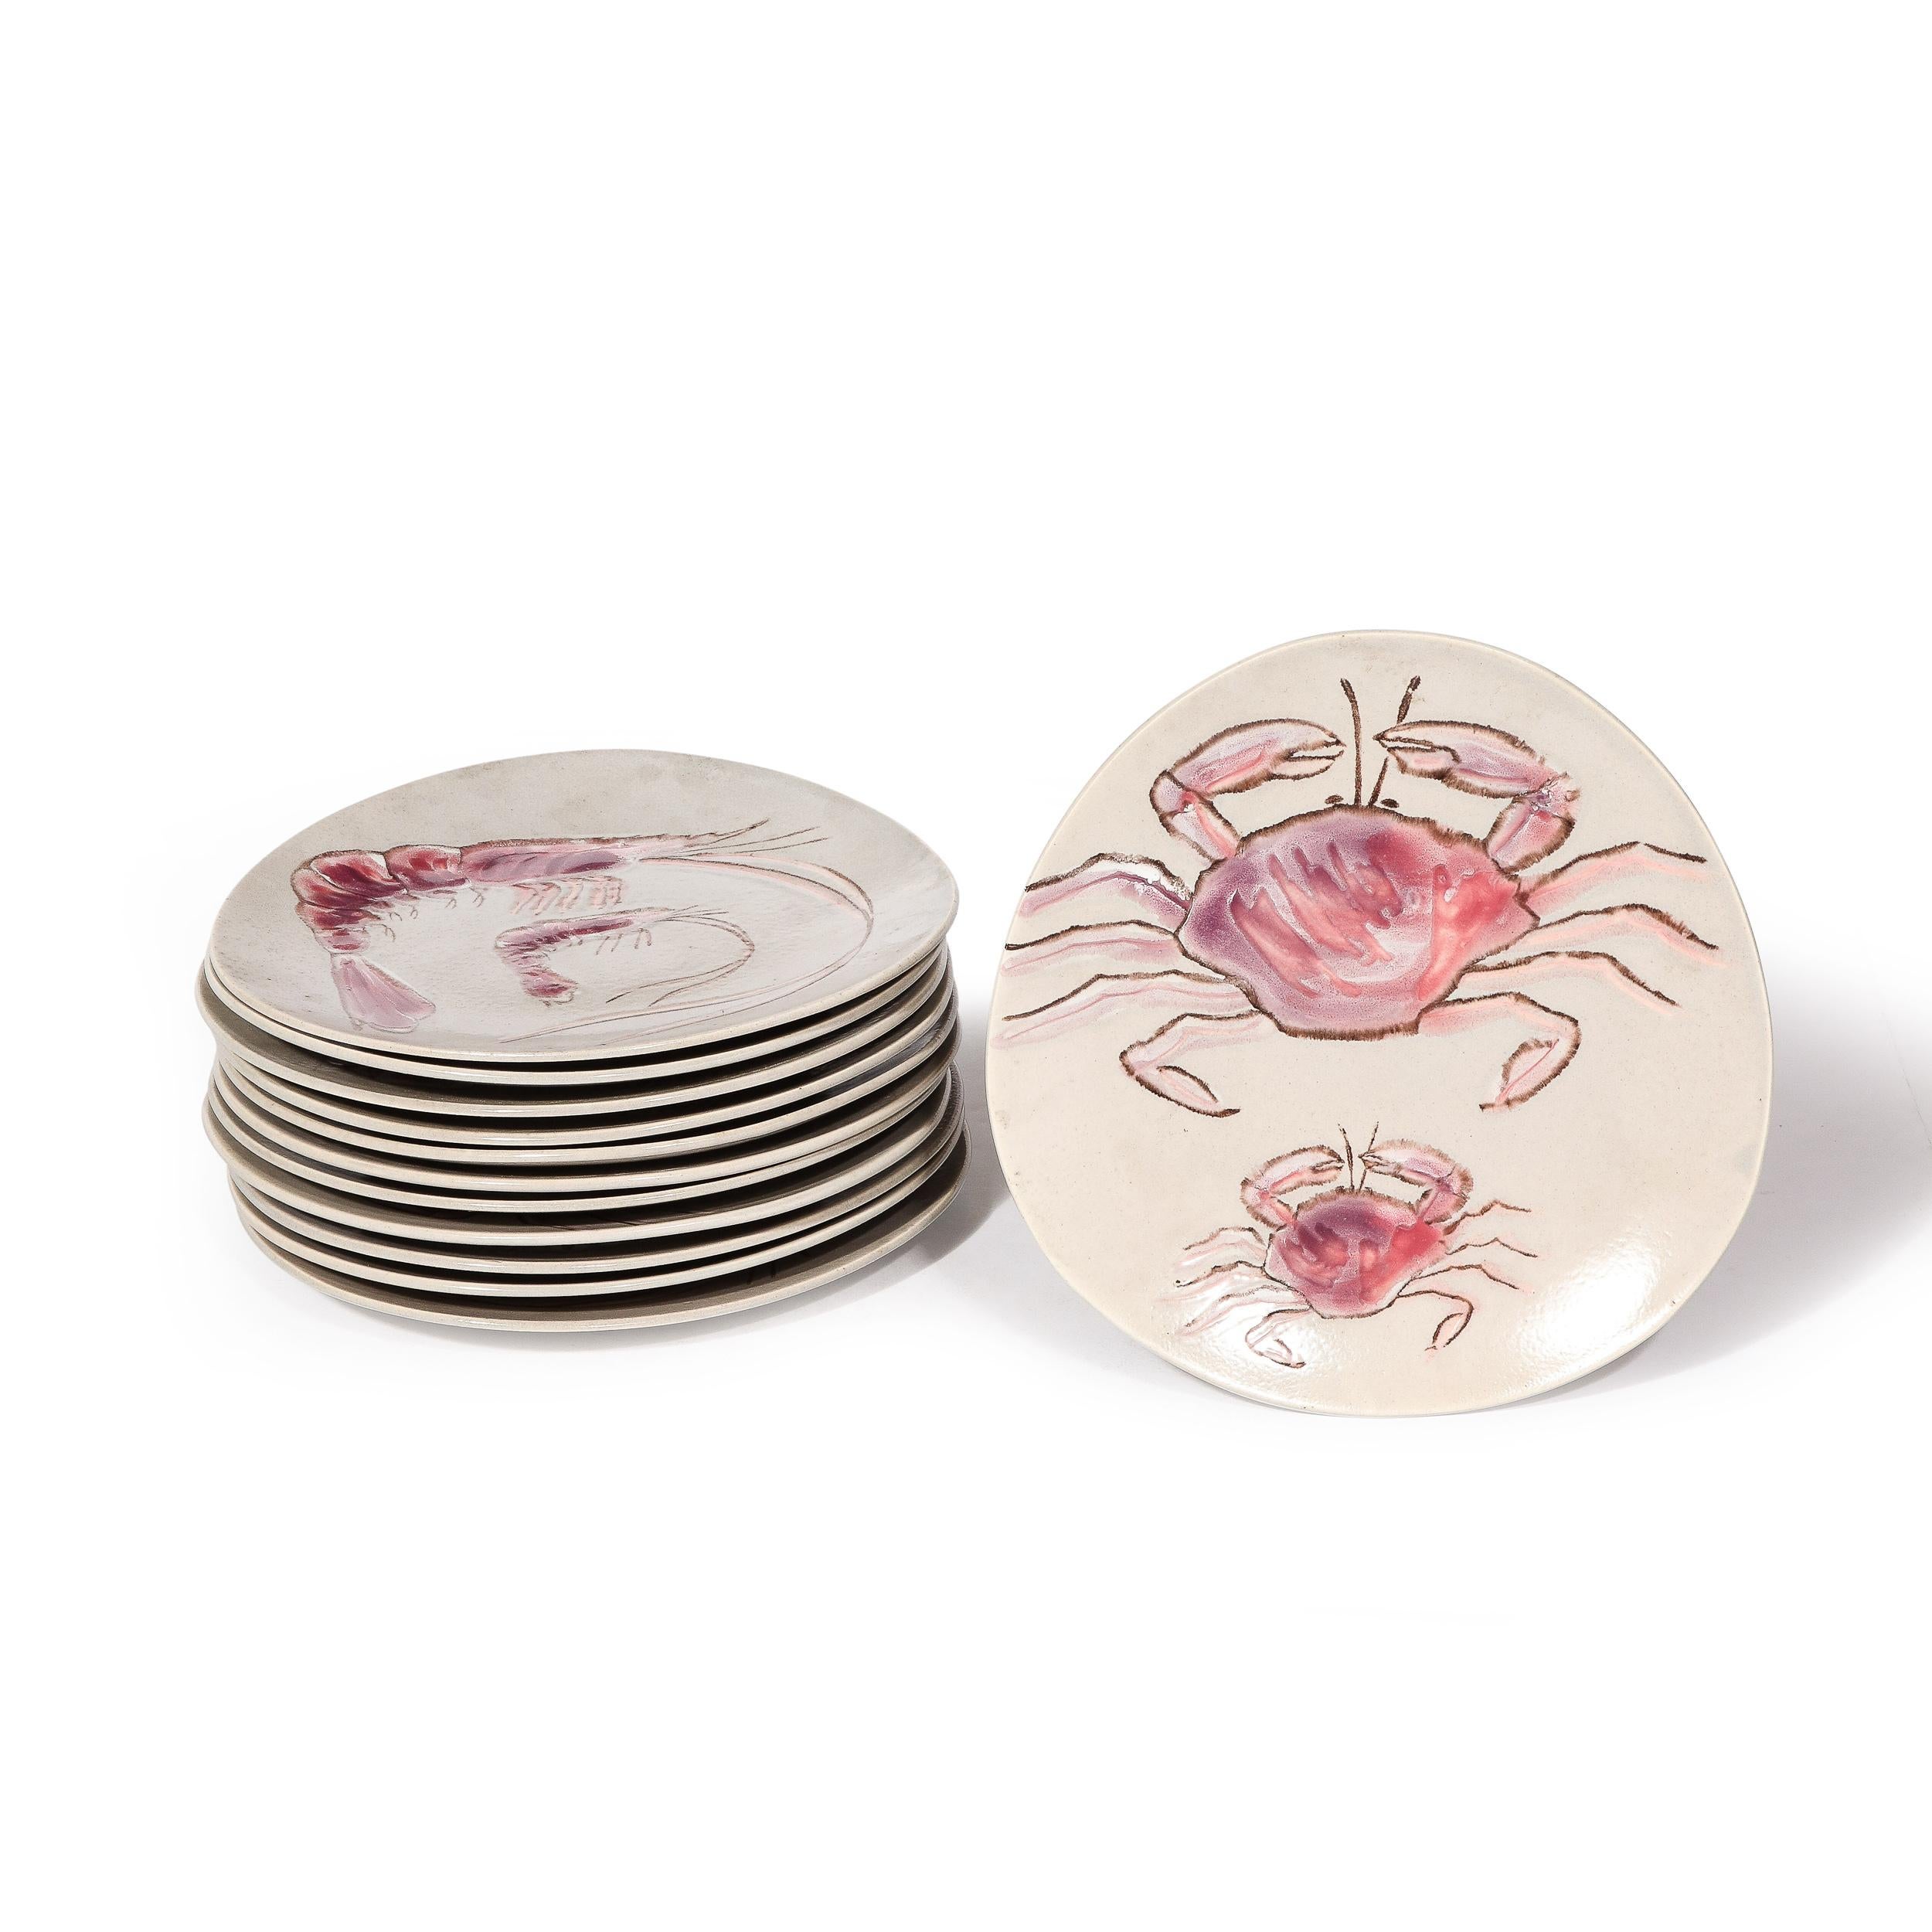 Glazed Set of 12 Mid-Century Ceramic Plates w/ Oceanic Motifs in Mauve by MBFA Pornic For Sale